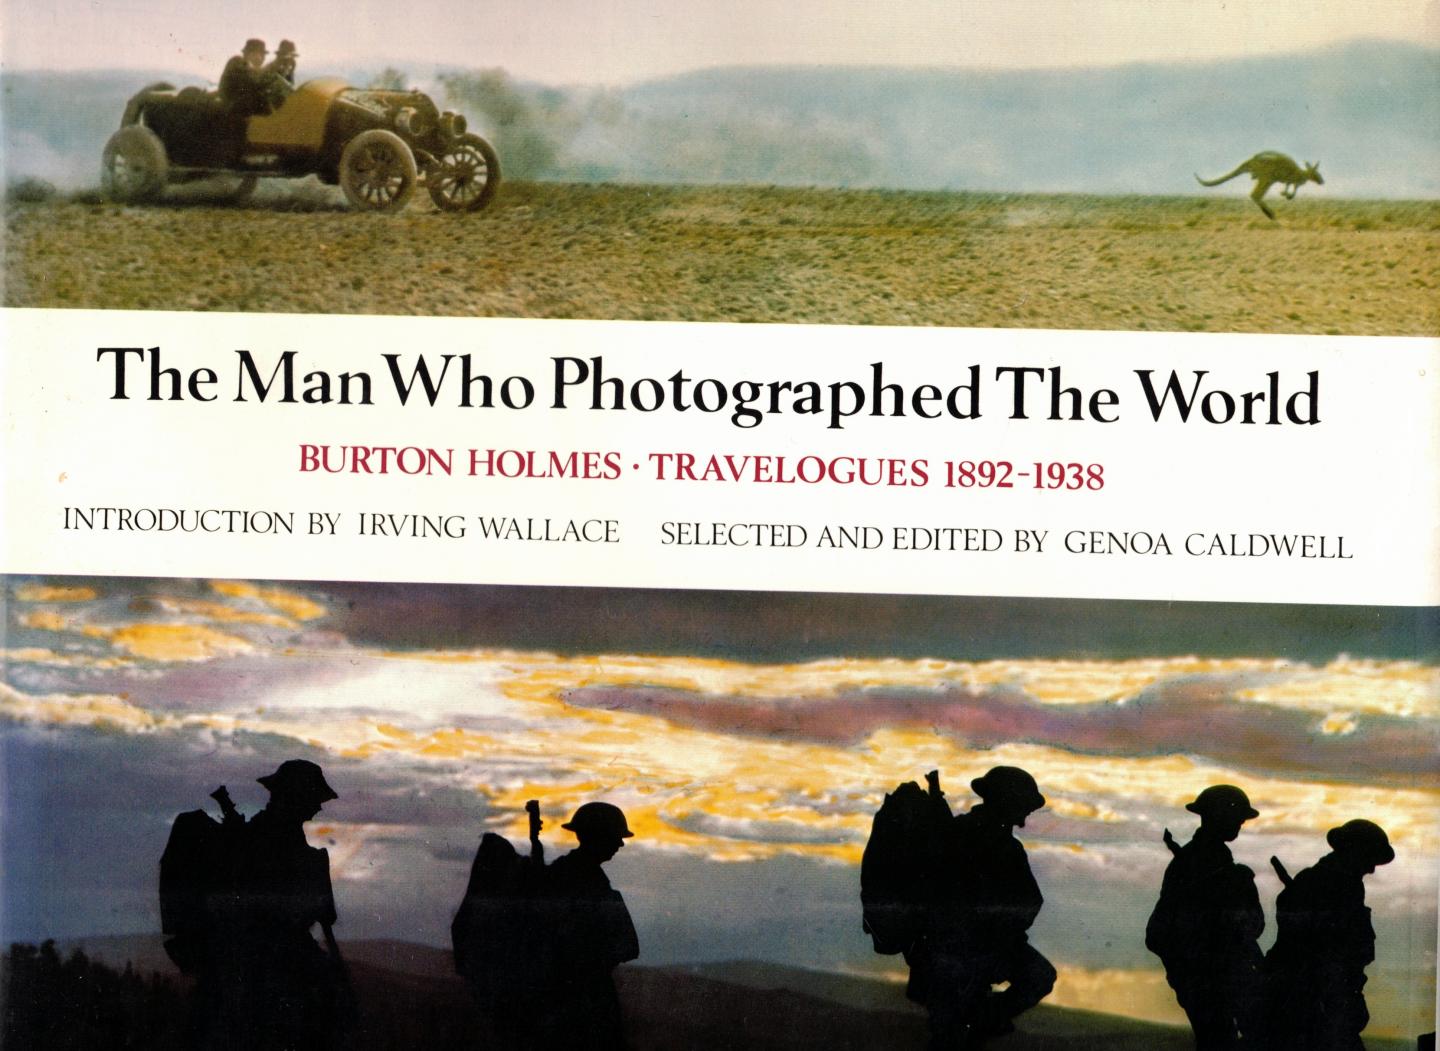 Caldwell, Genoa (editor) & Irving Wallace (introduction) - The man who photographed the world / Burton Holmes - Travelogues 1892-1938